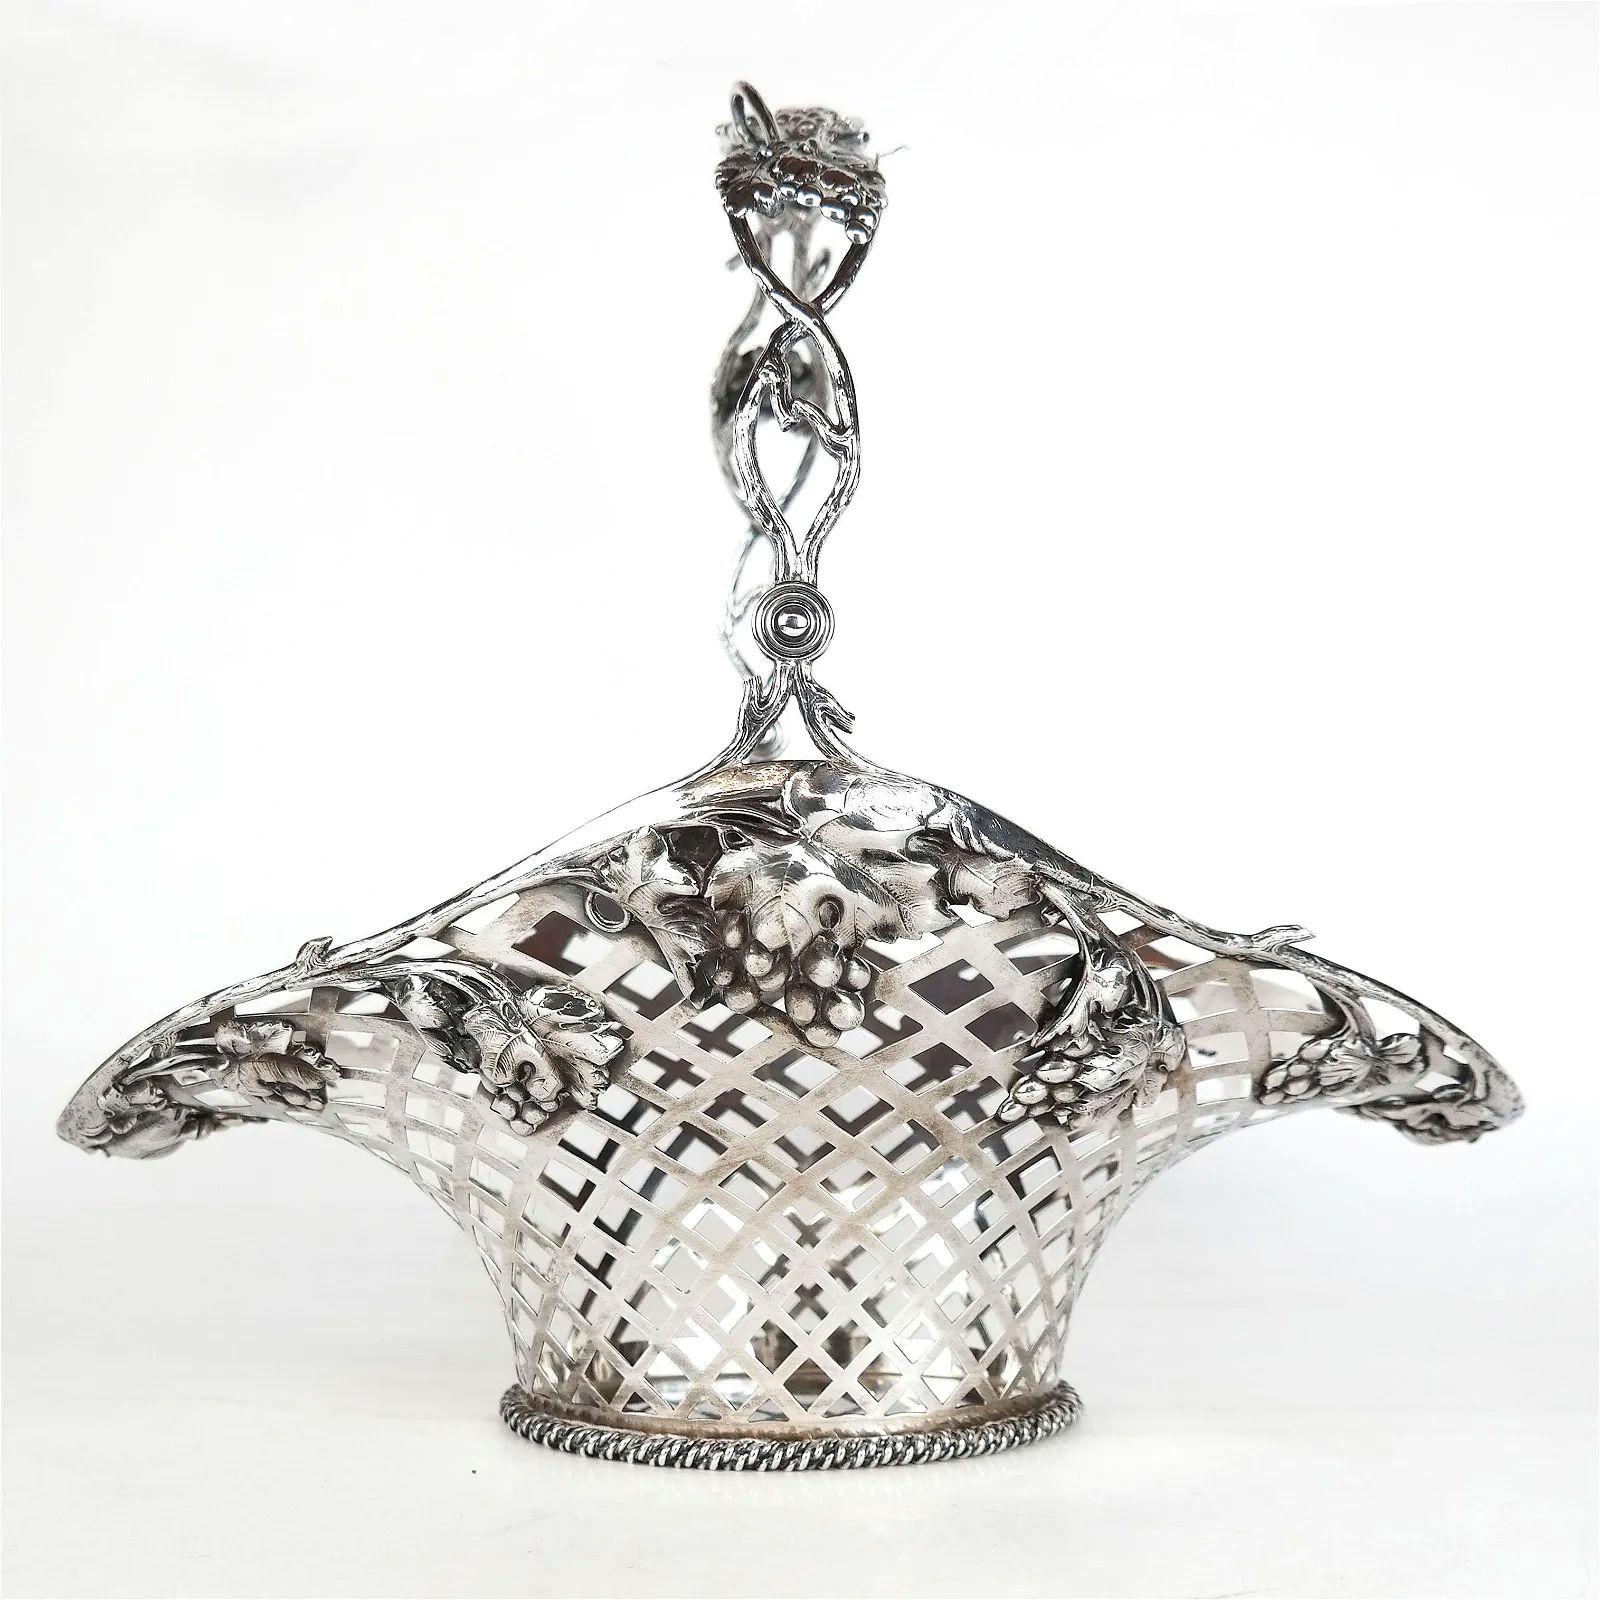 Our large reticulated fruit basket by Mauser Mfg. Co. of New York, circa 1900s, is distinguished by its large size and finely sculpted handle and rim decorated with grapevine motifs. Underside with the maker's mark, style number and STERLING. 47.5